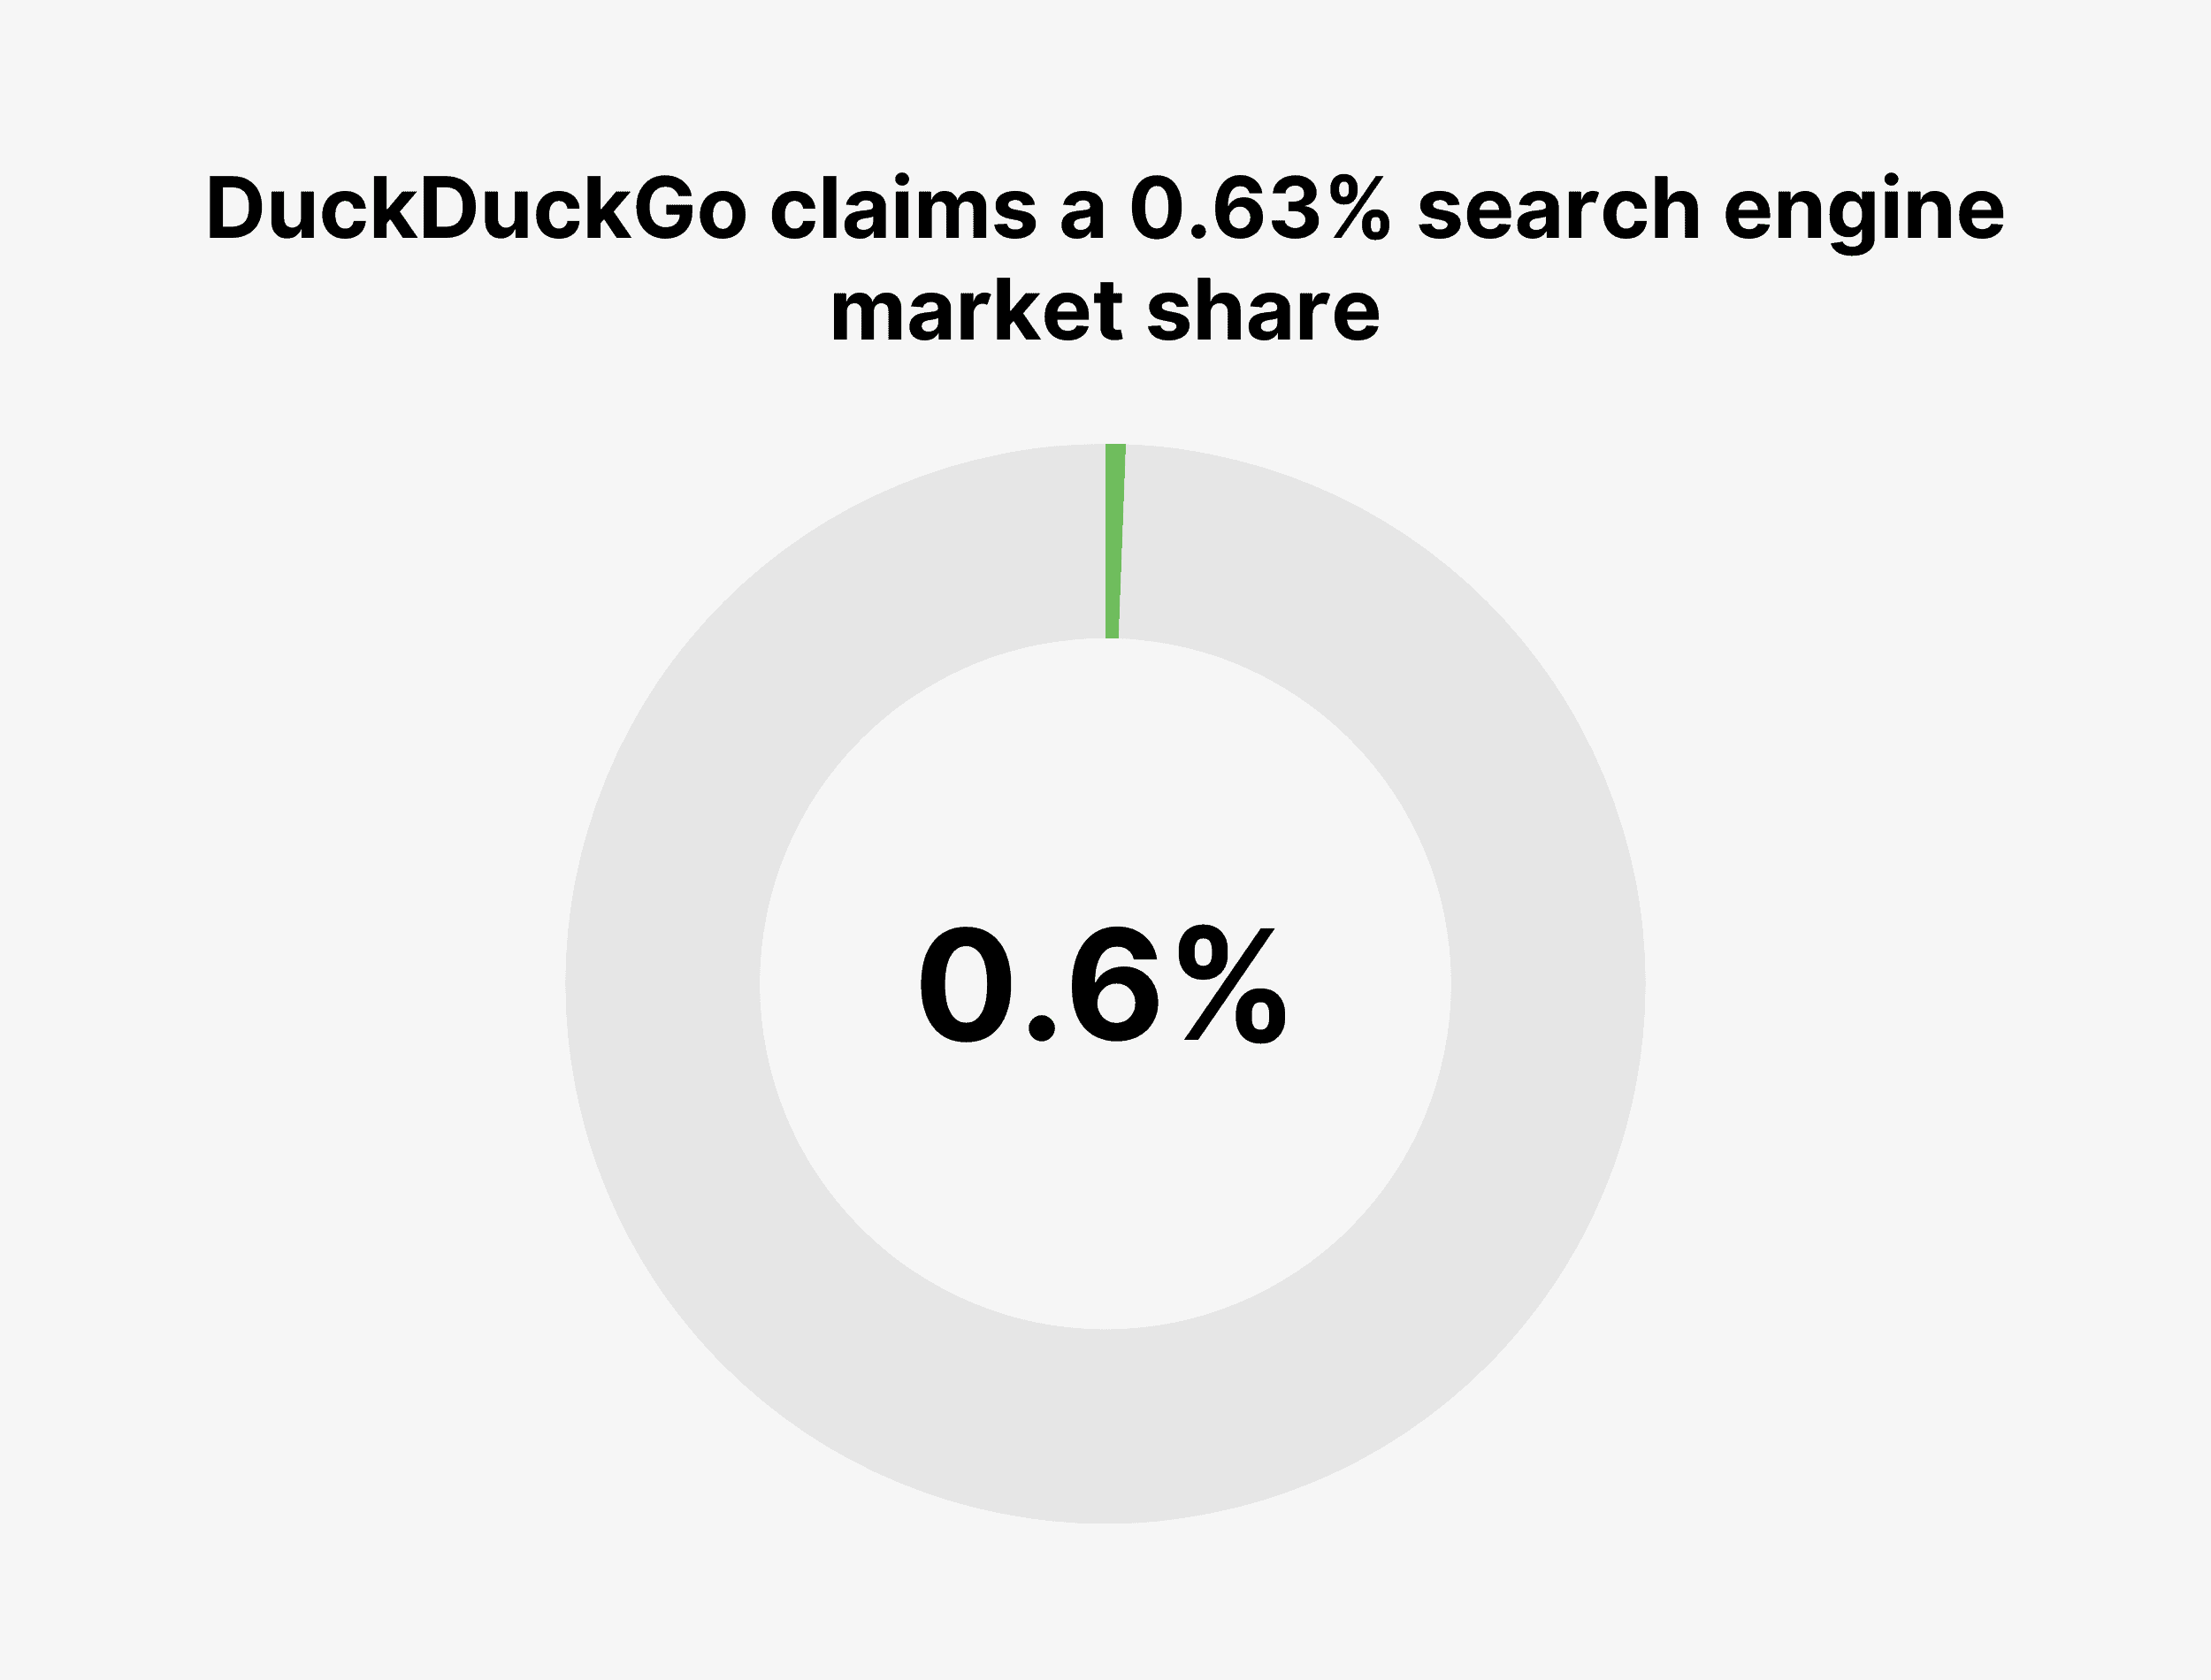 DuckDuckGo claims a 0.63% search engine market share